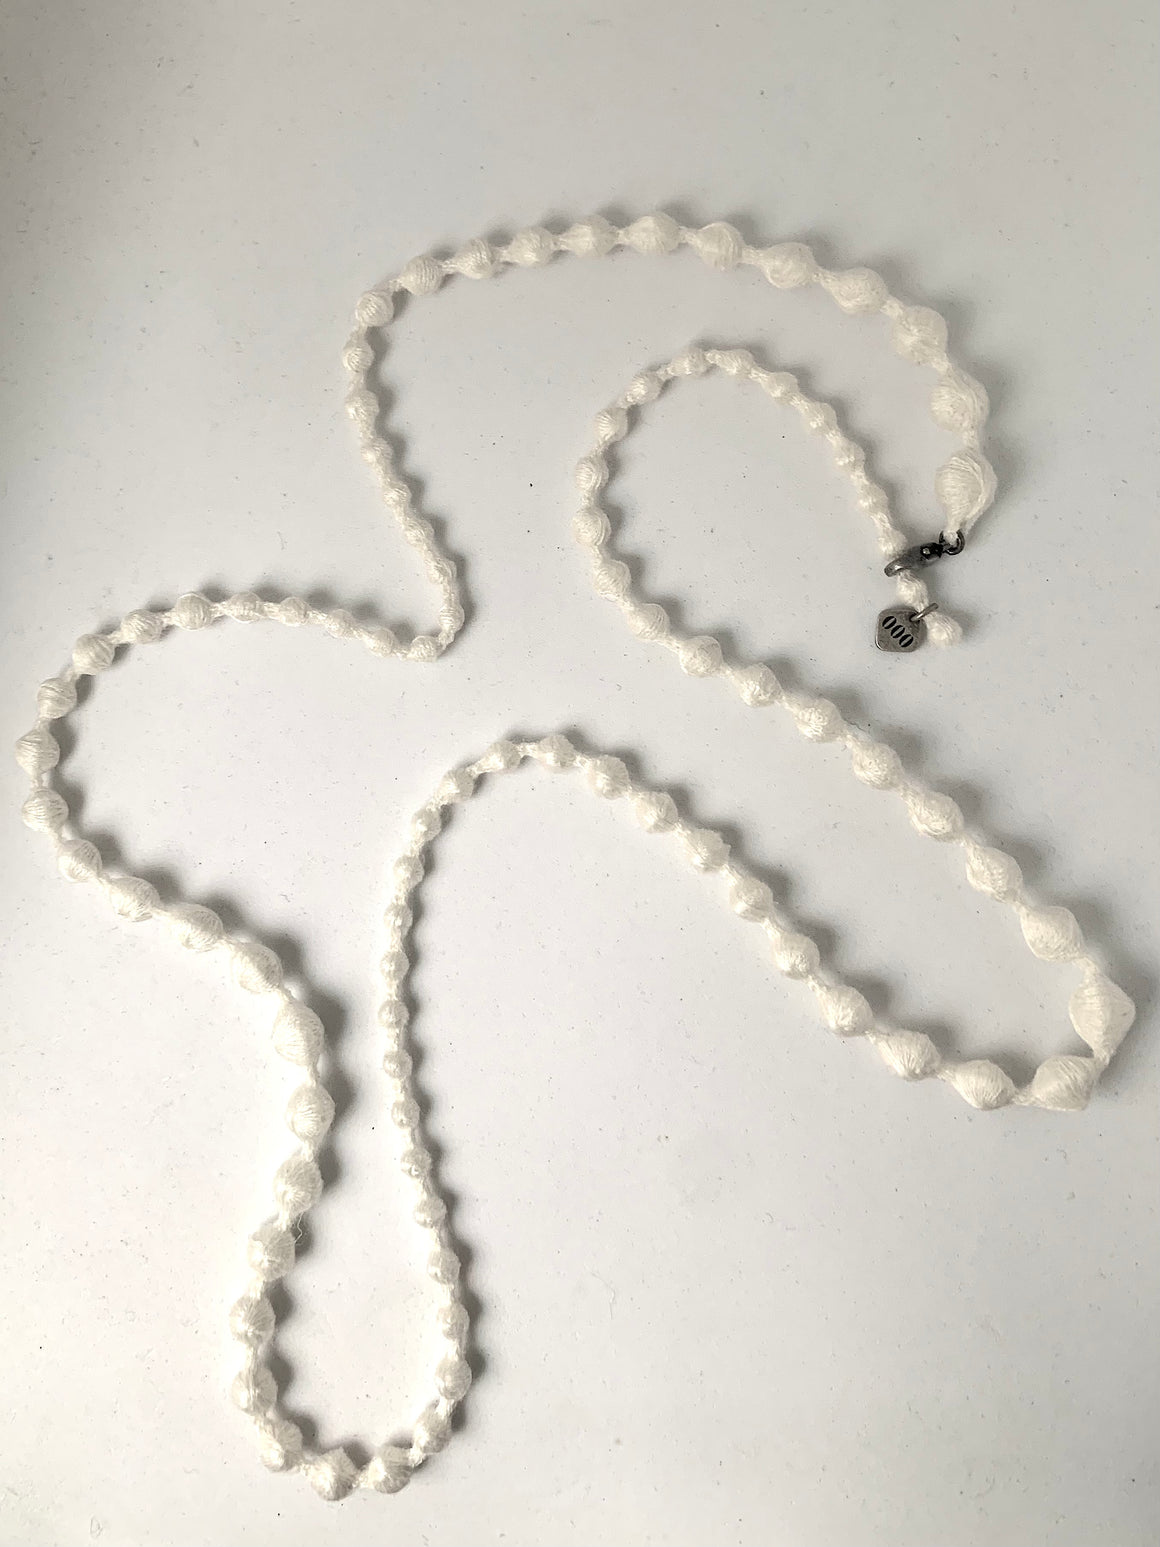 Silk beaded necklace - off white